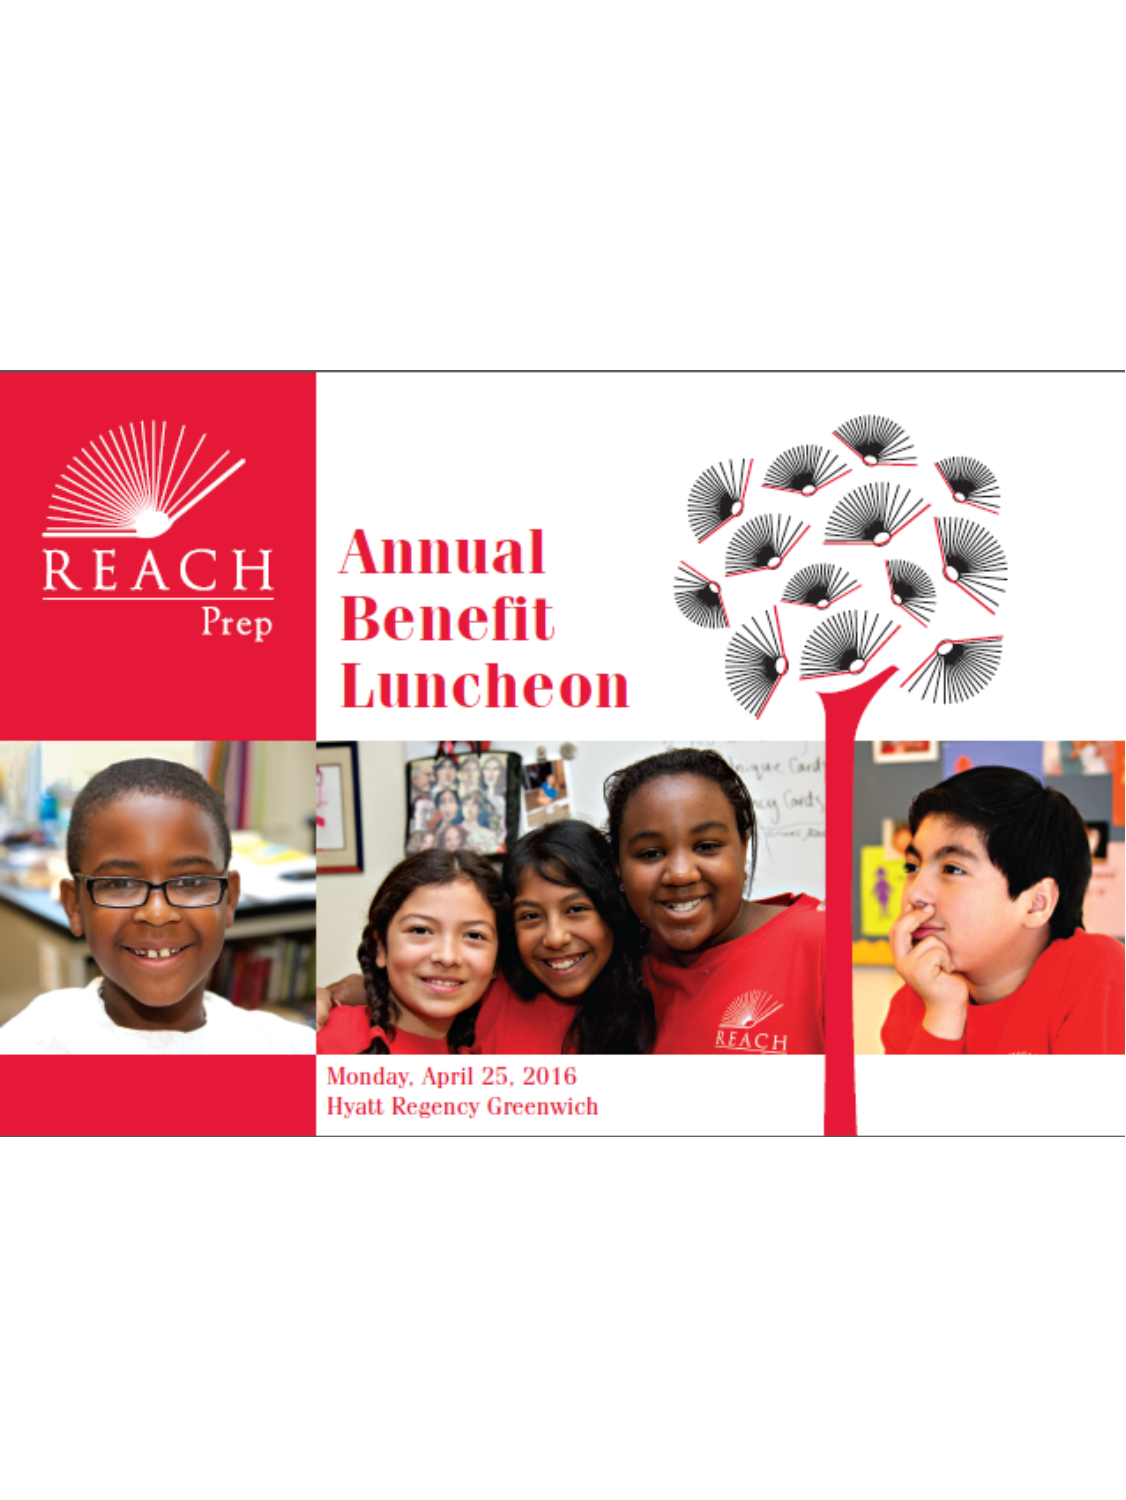 Annual Benefit Luncheon 2016